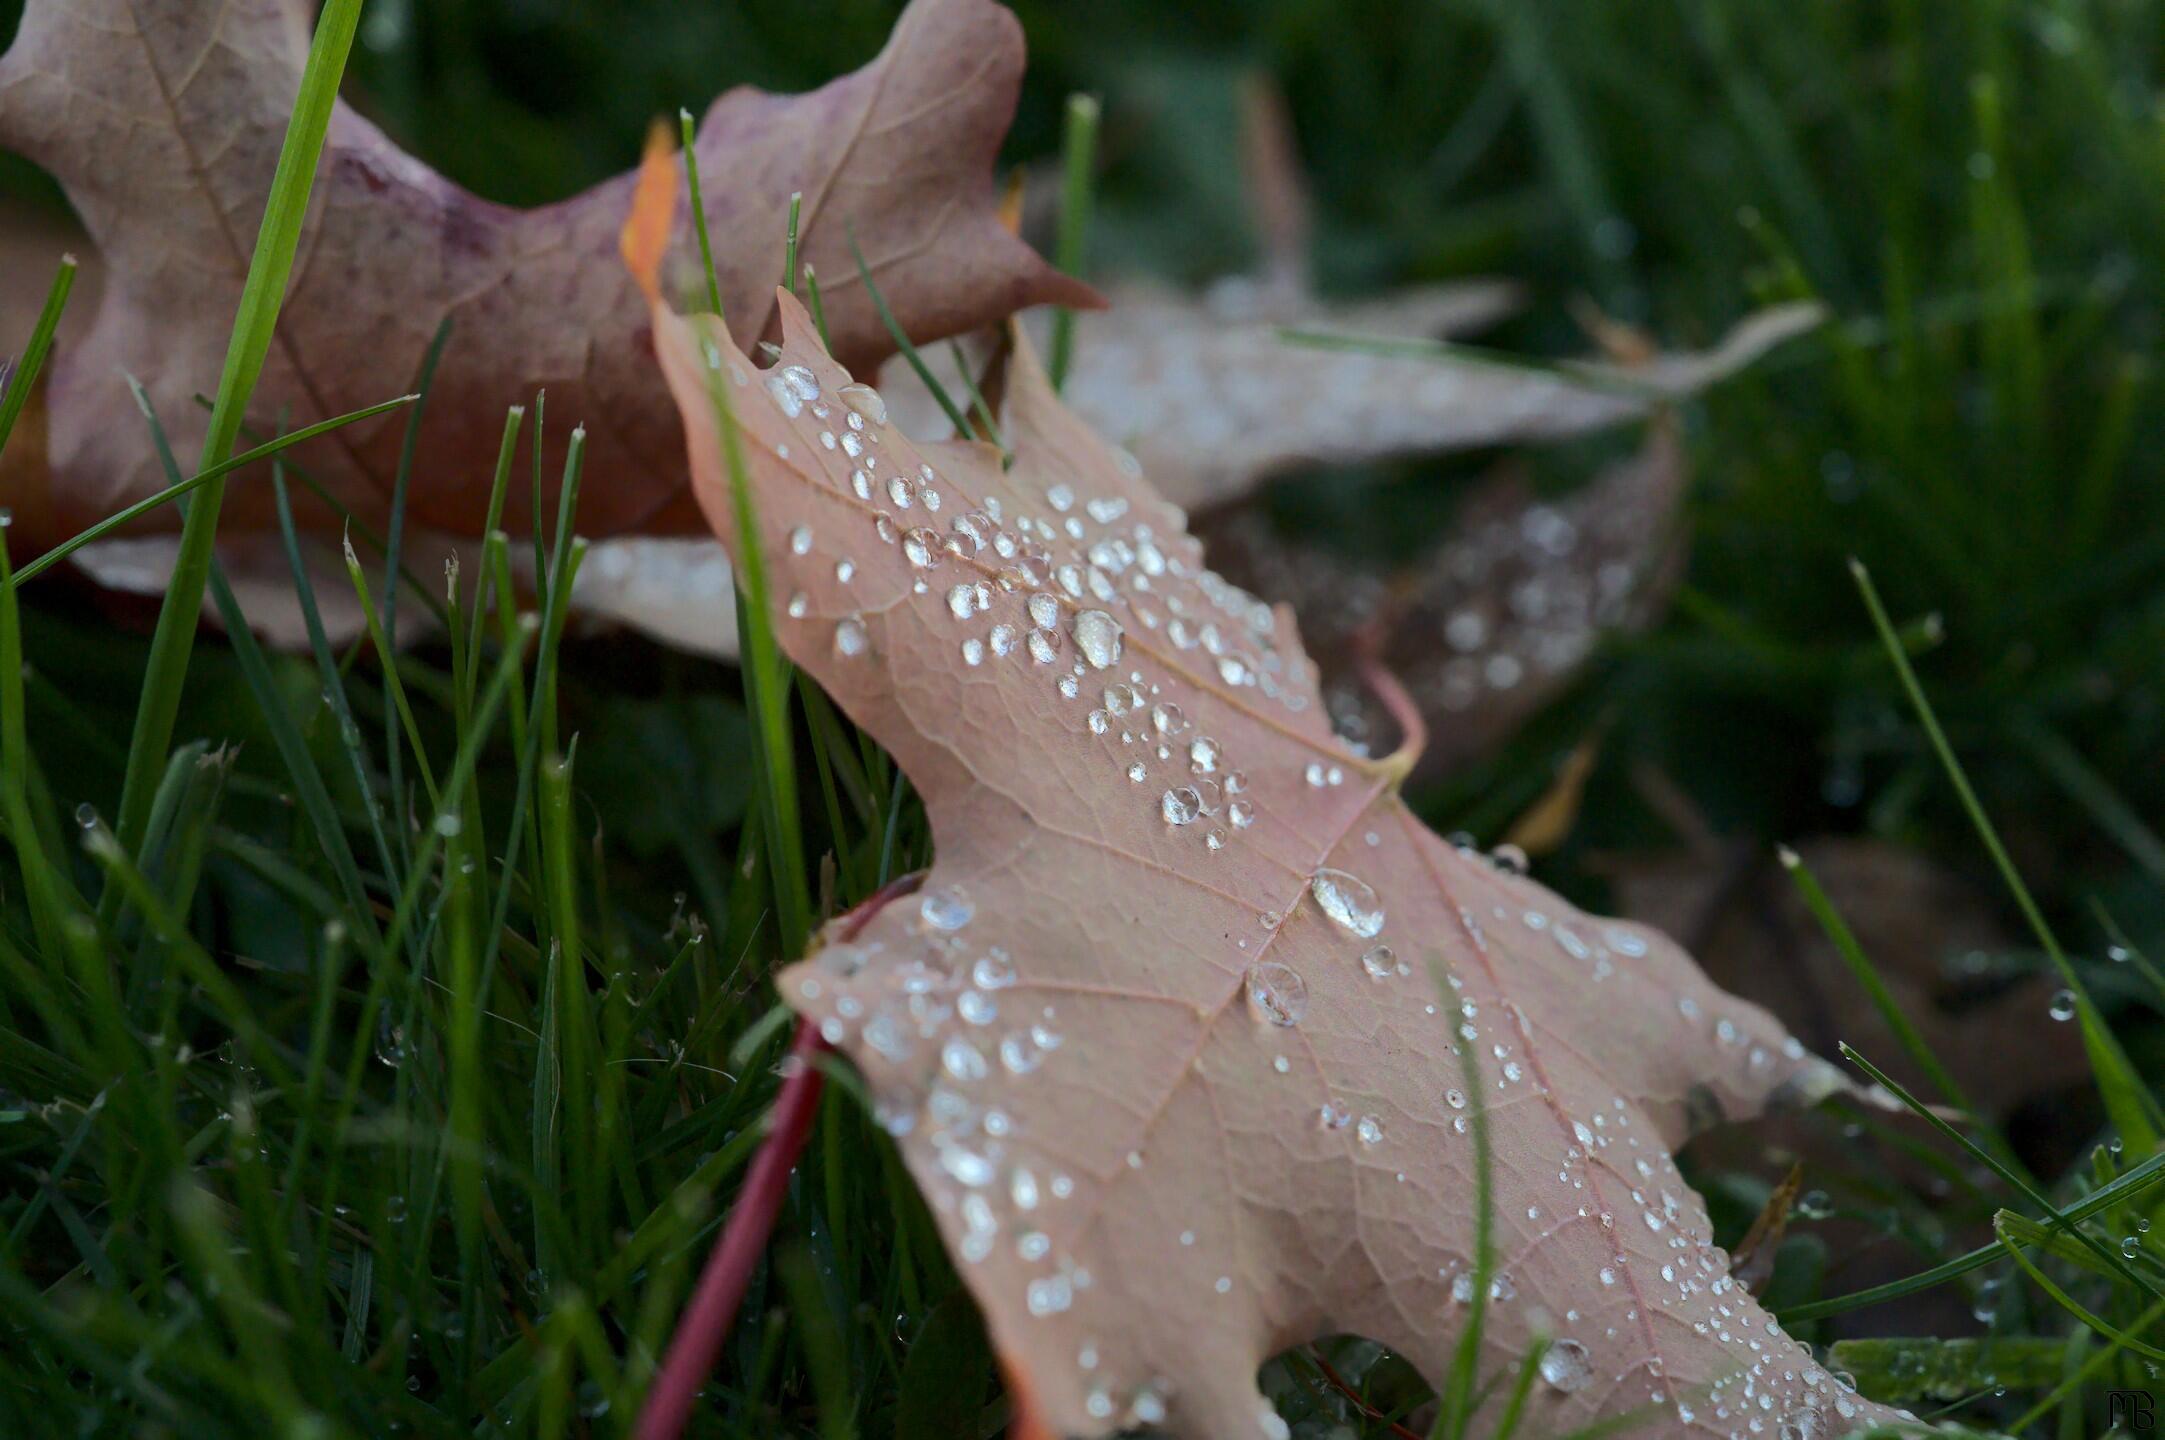 Dew drops on leaf in grass